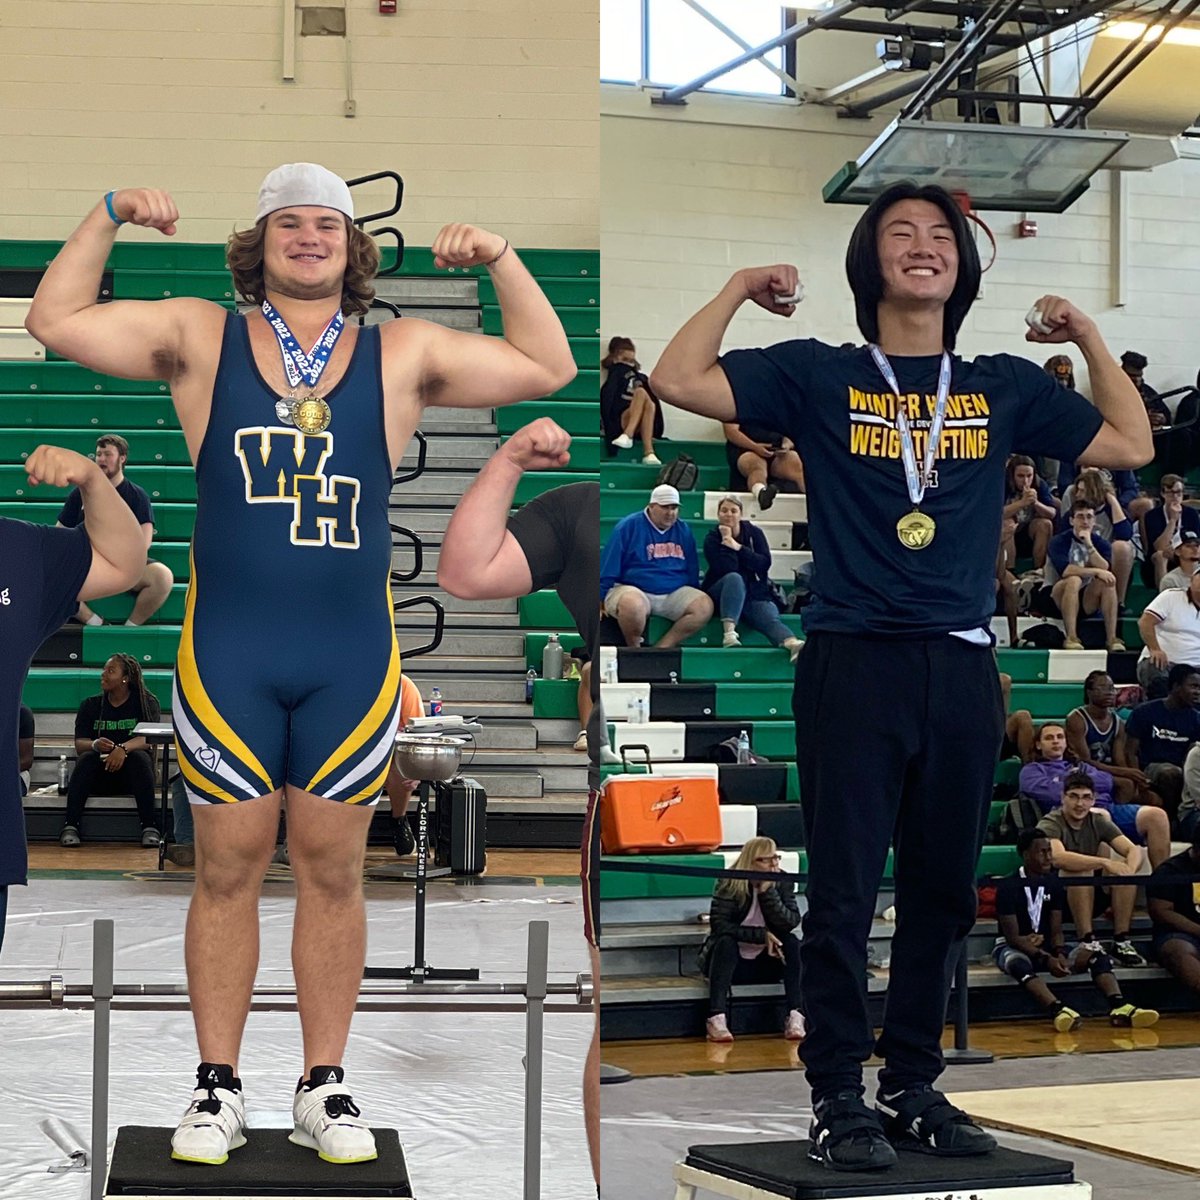 Congratulations to Xander and Zane for qualify for the Boy’s Weightlifting State Championships! #weightlifting #snatch #benchpress #cleanandjerk @PolkSchoolsNews @PolkPreps @pcps_athletics @RoyFuoco